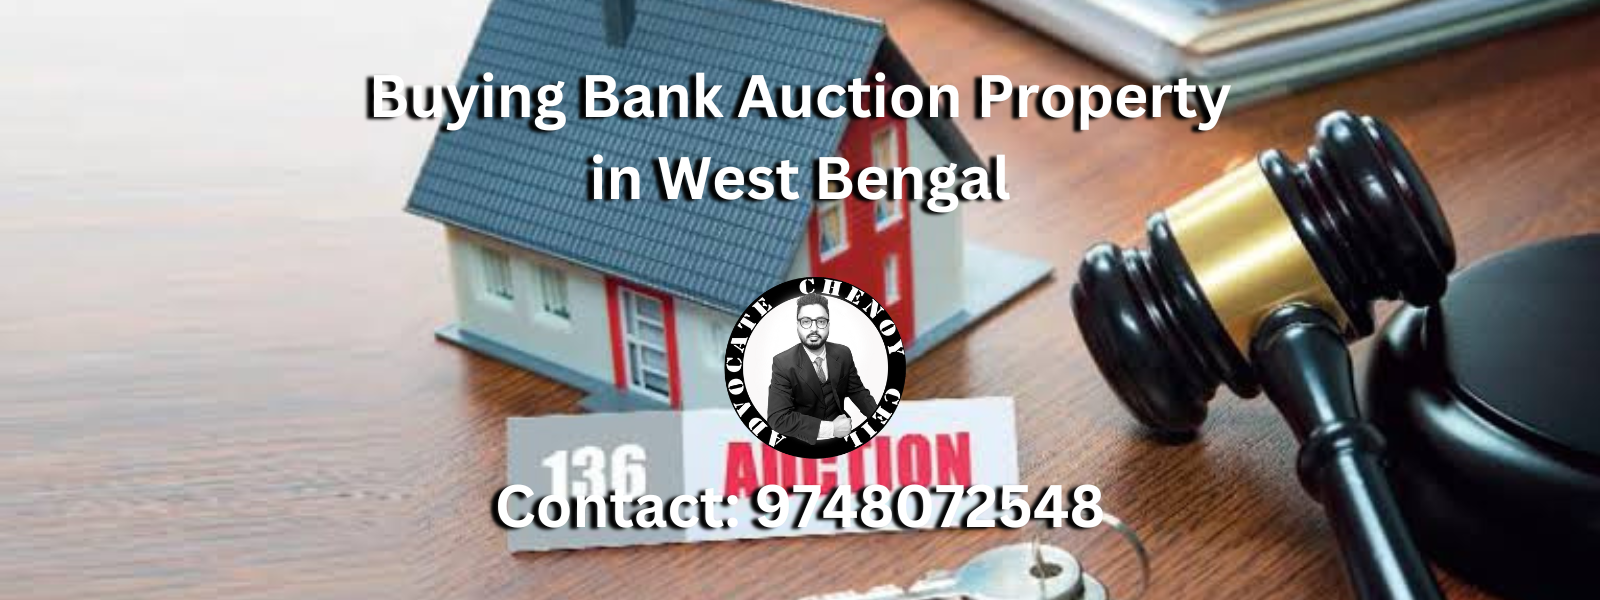 Bank Auction Property Buying